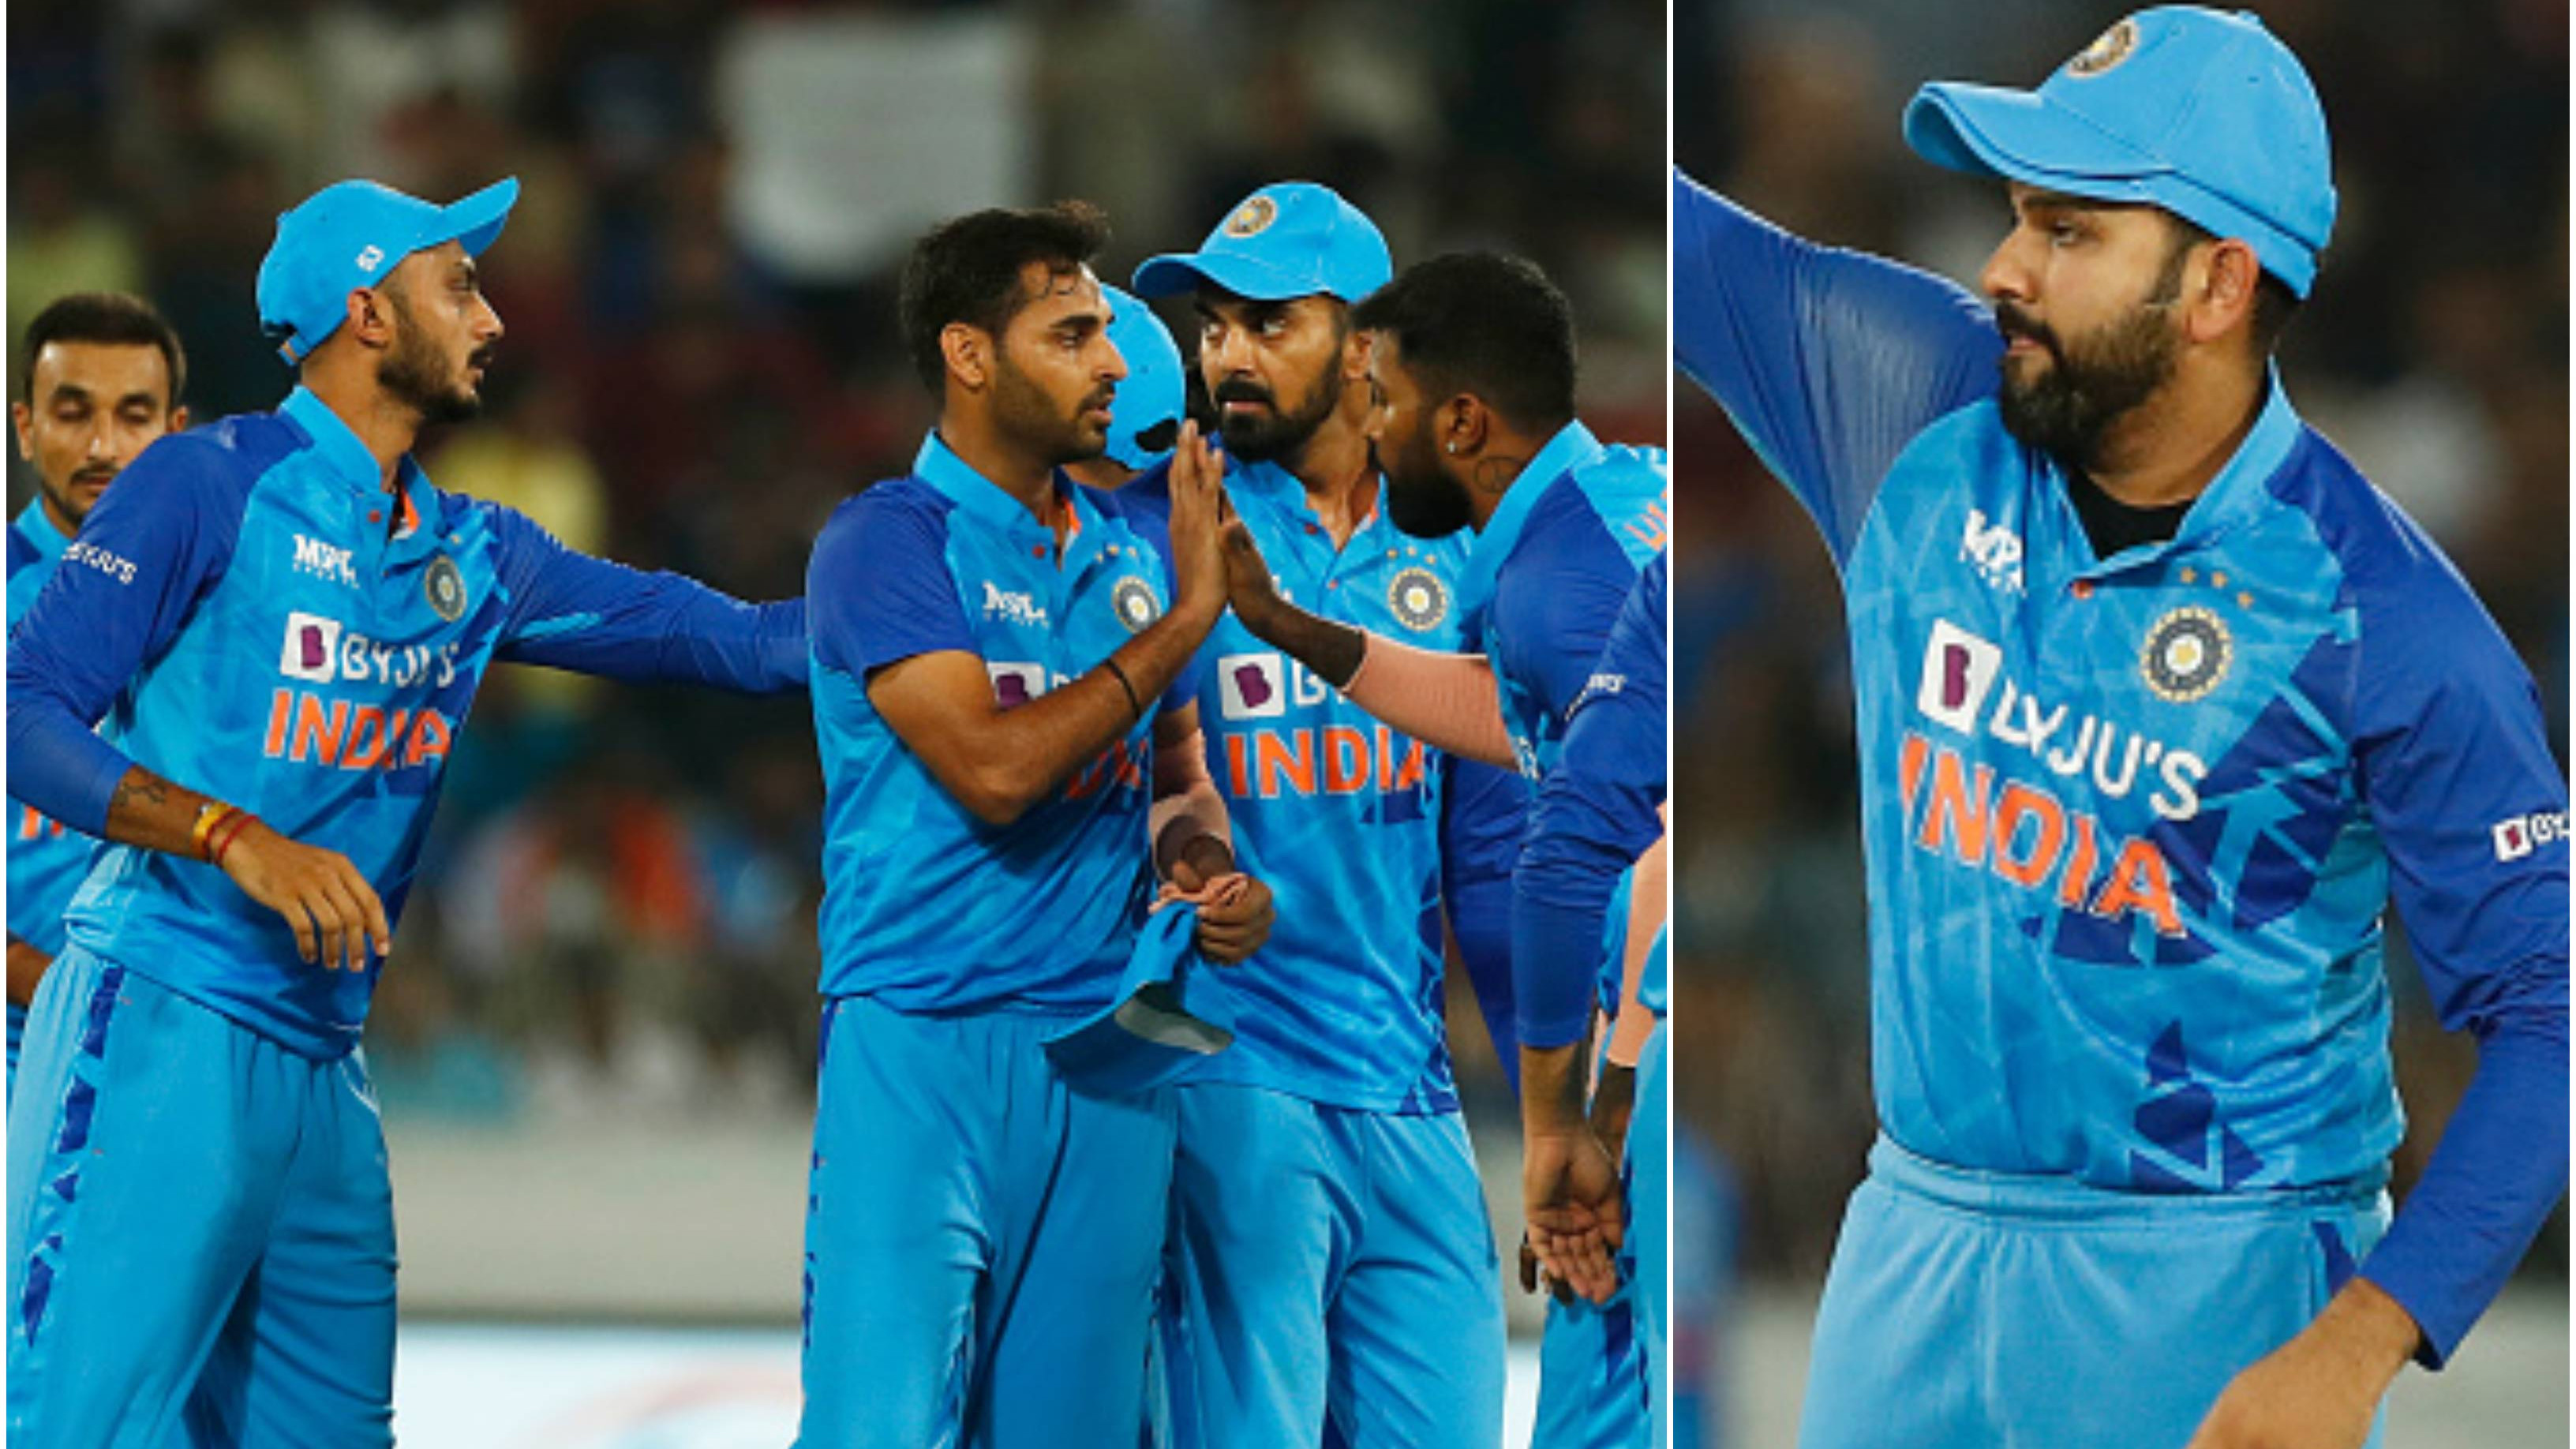 IND v AUS 2022: Rohit Sharma says death bowling remains an area of concern for Indian team despite series win